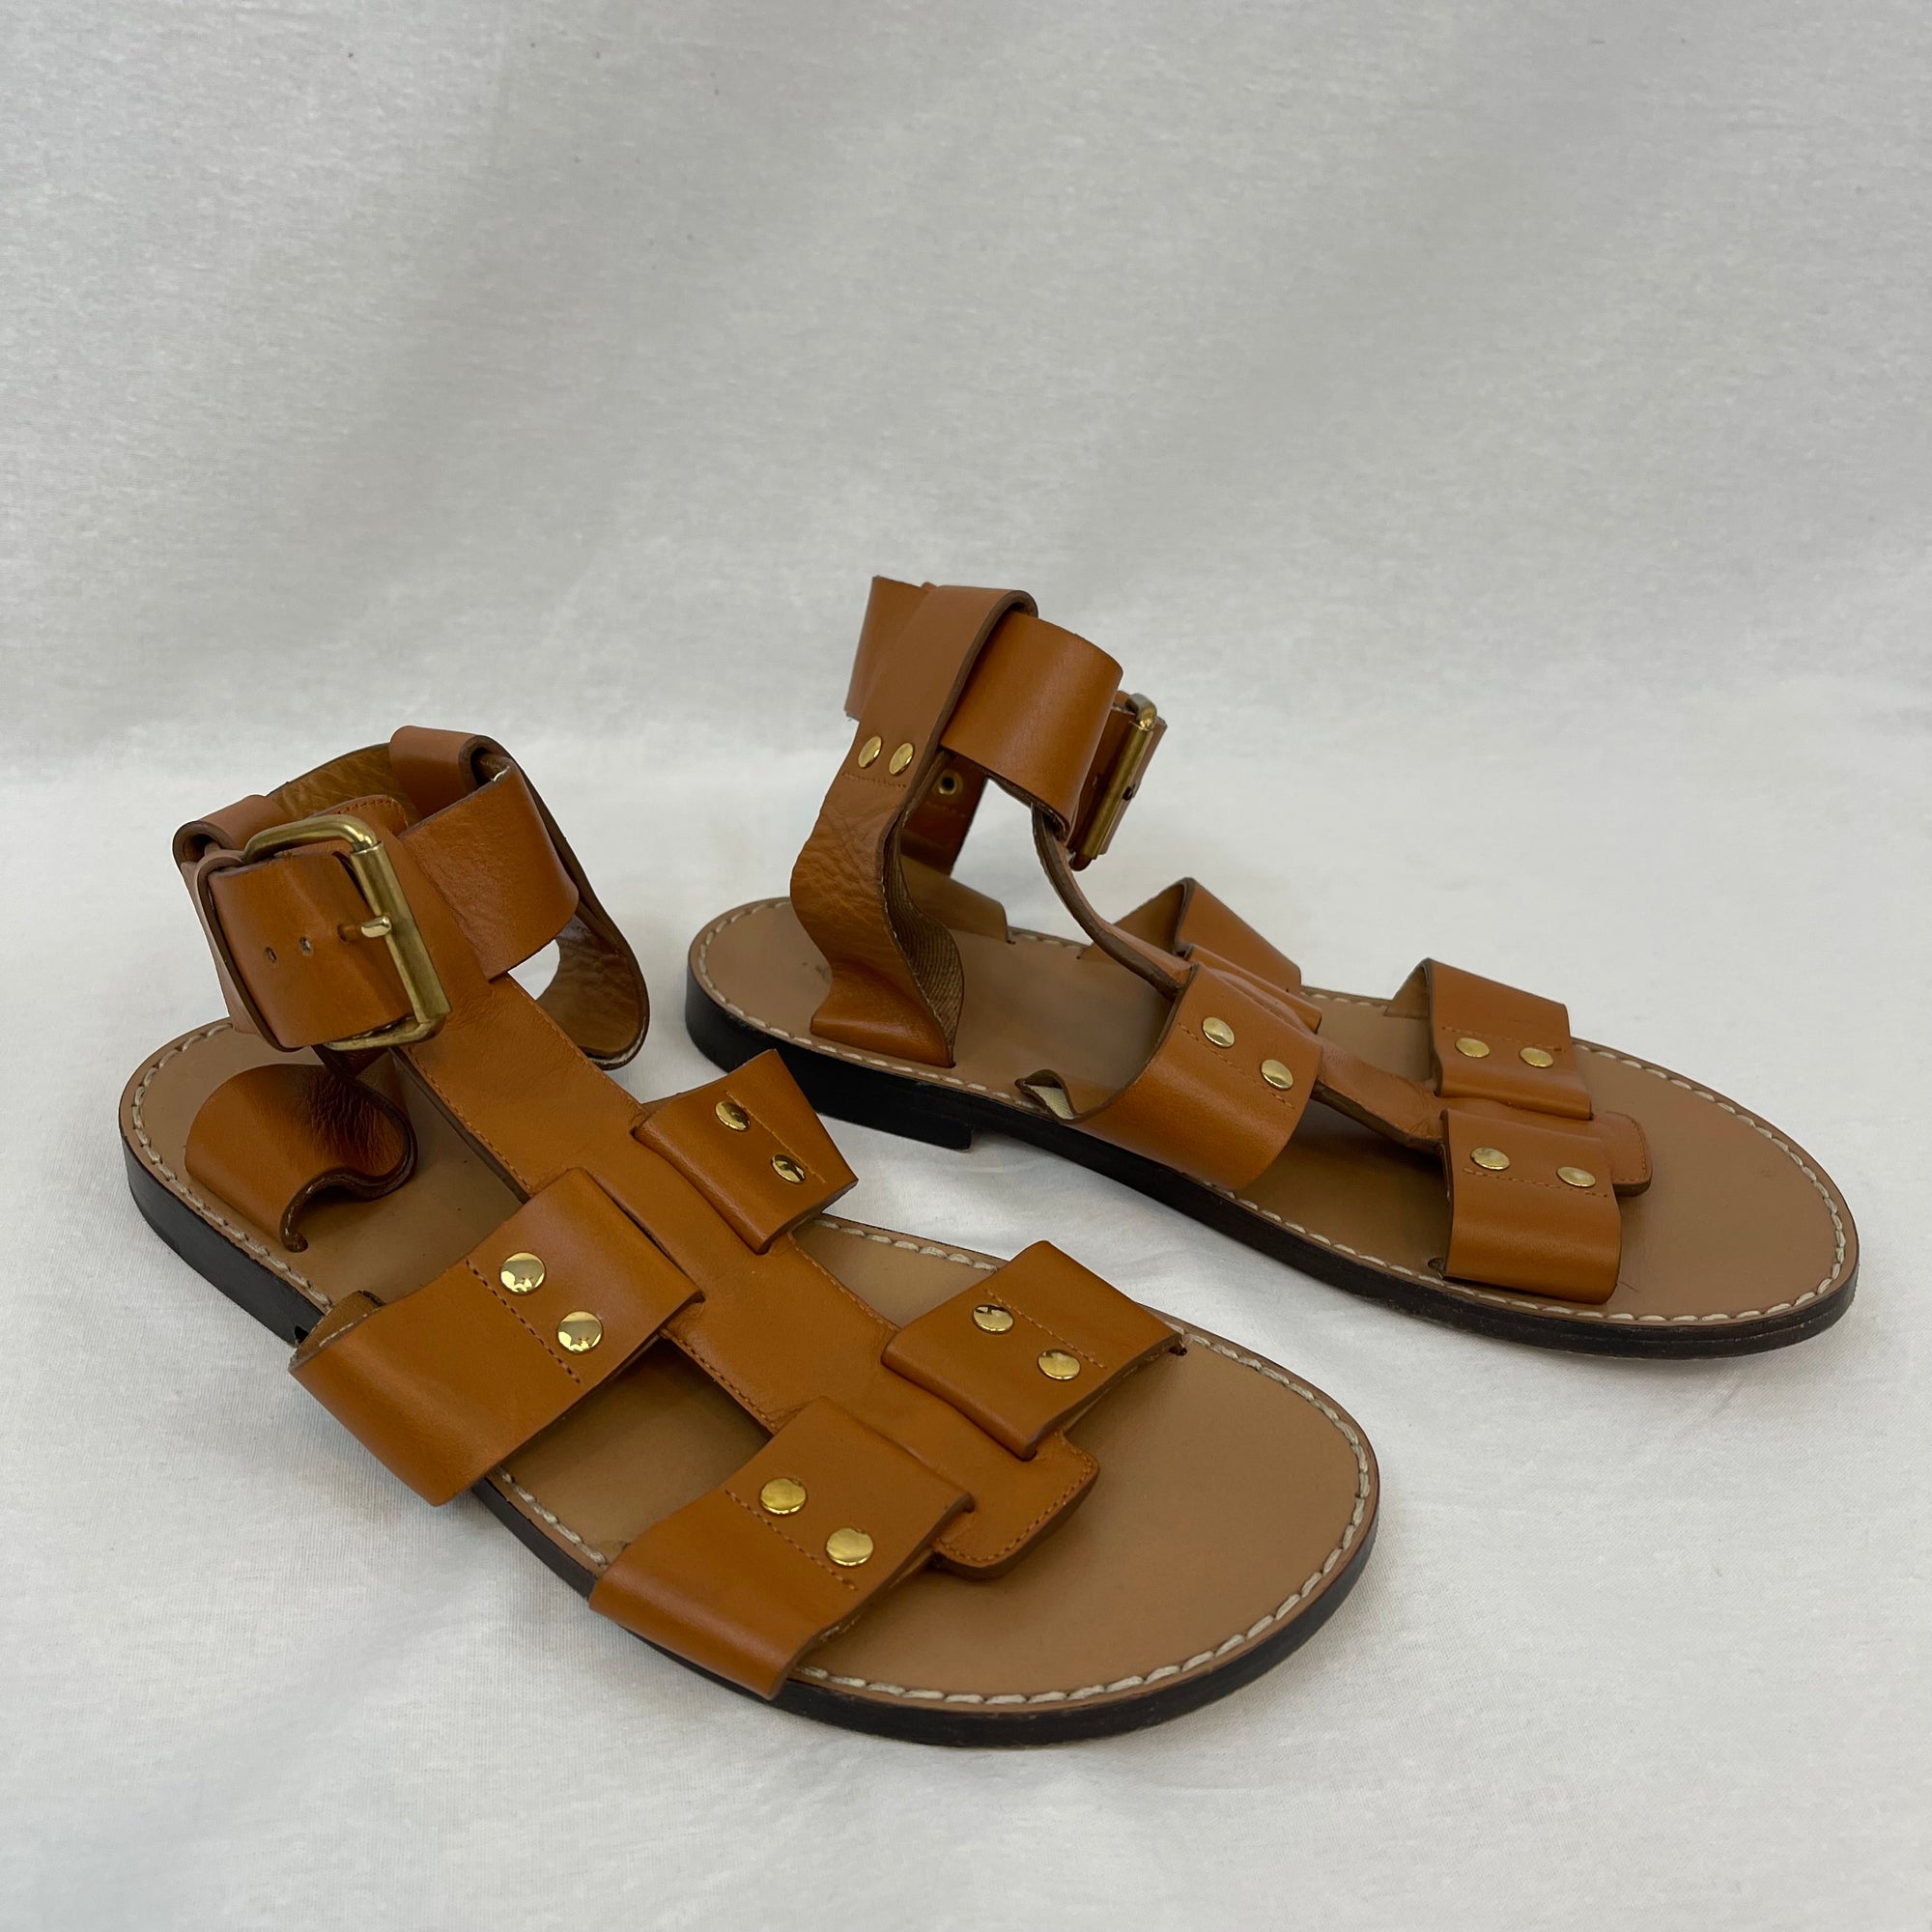 Chloe Brown Leather Gladiator Sandals size 36.5